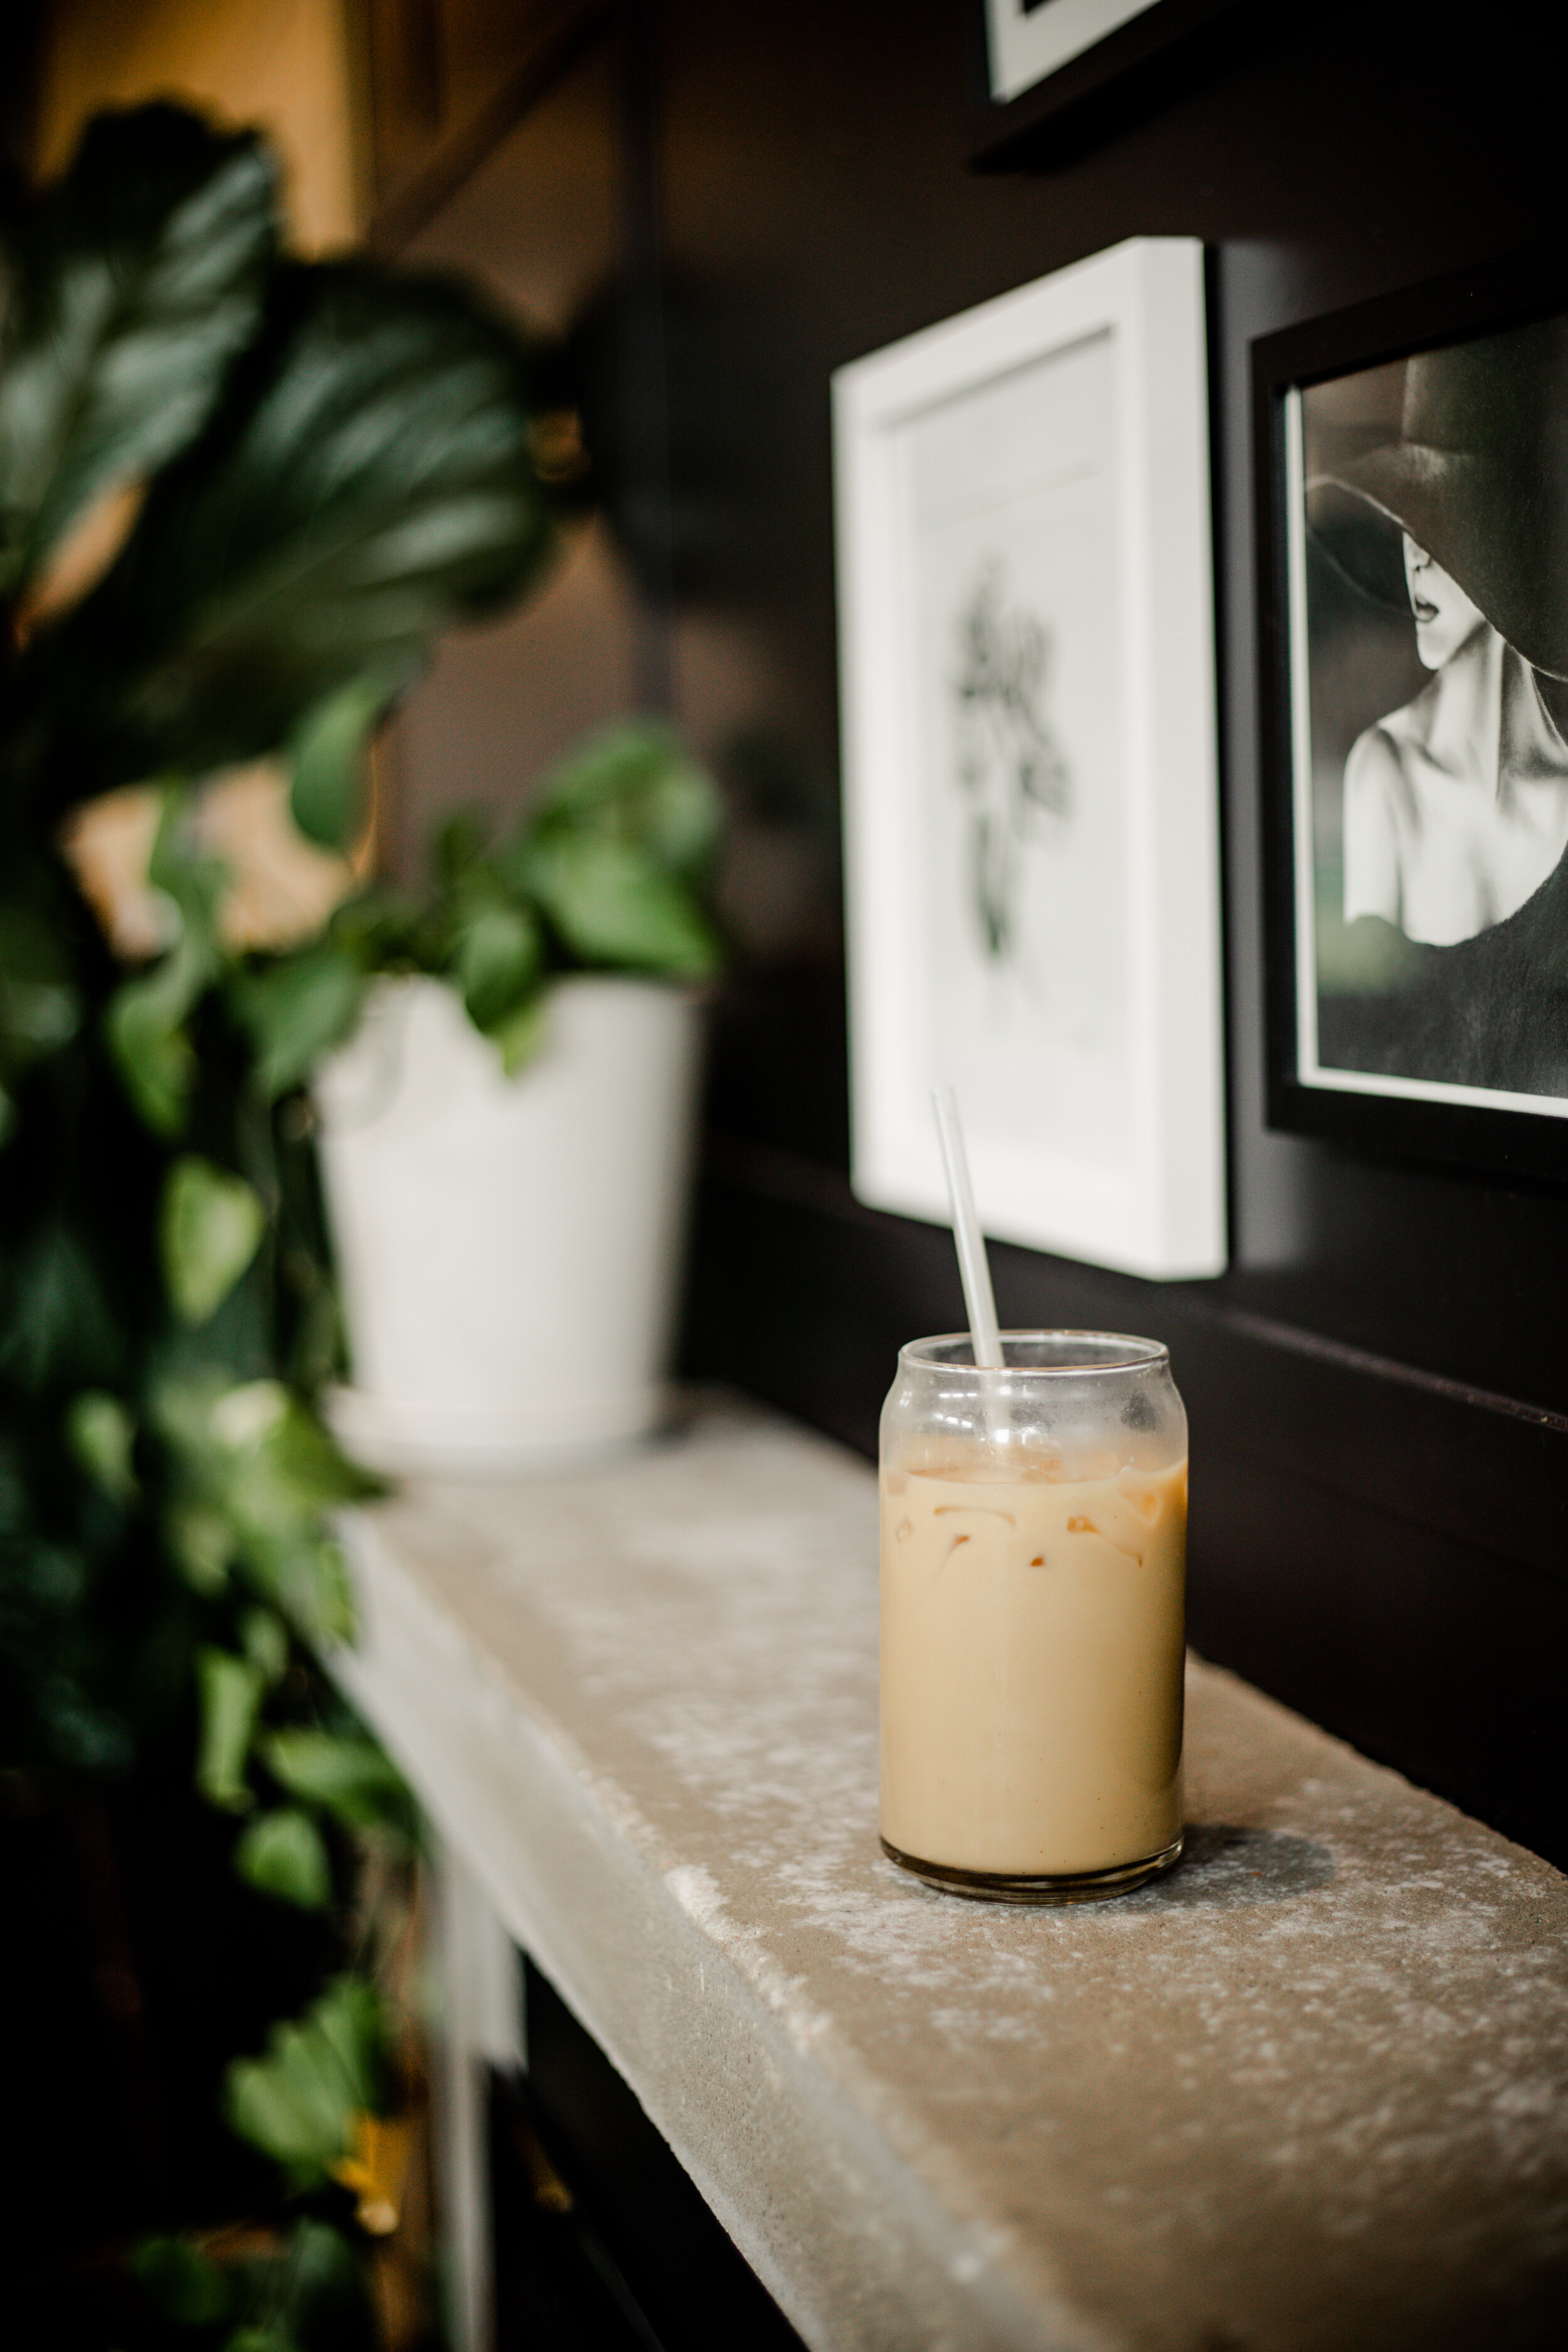 At Scandi Tiny, you can enjoy an iced latte while surrounded by drawings and paintings from local artists.